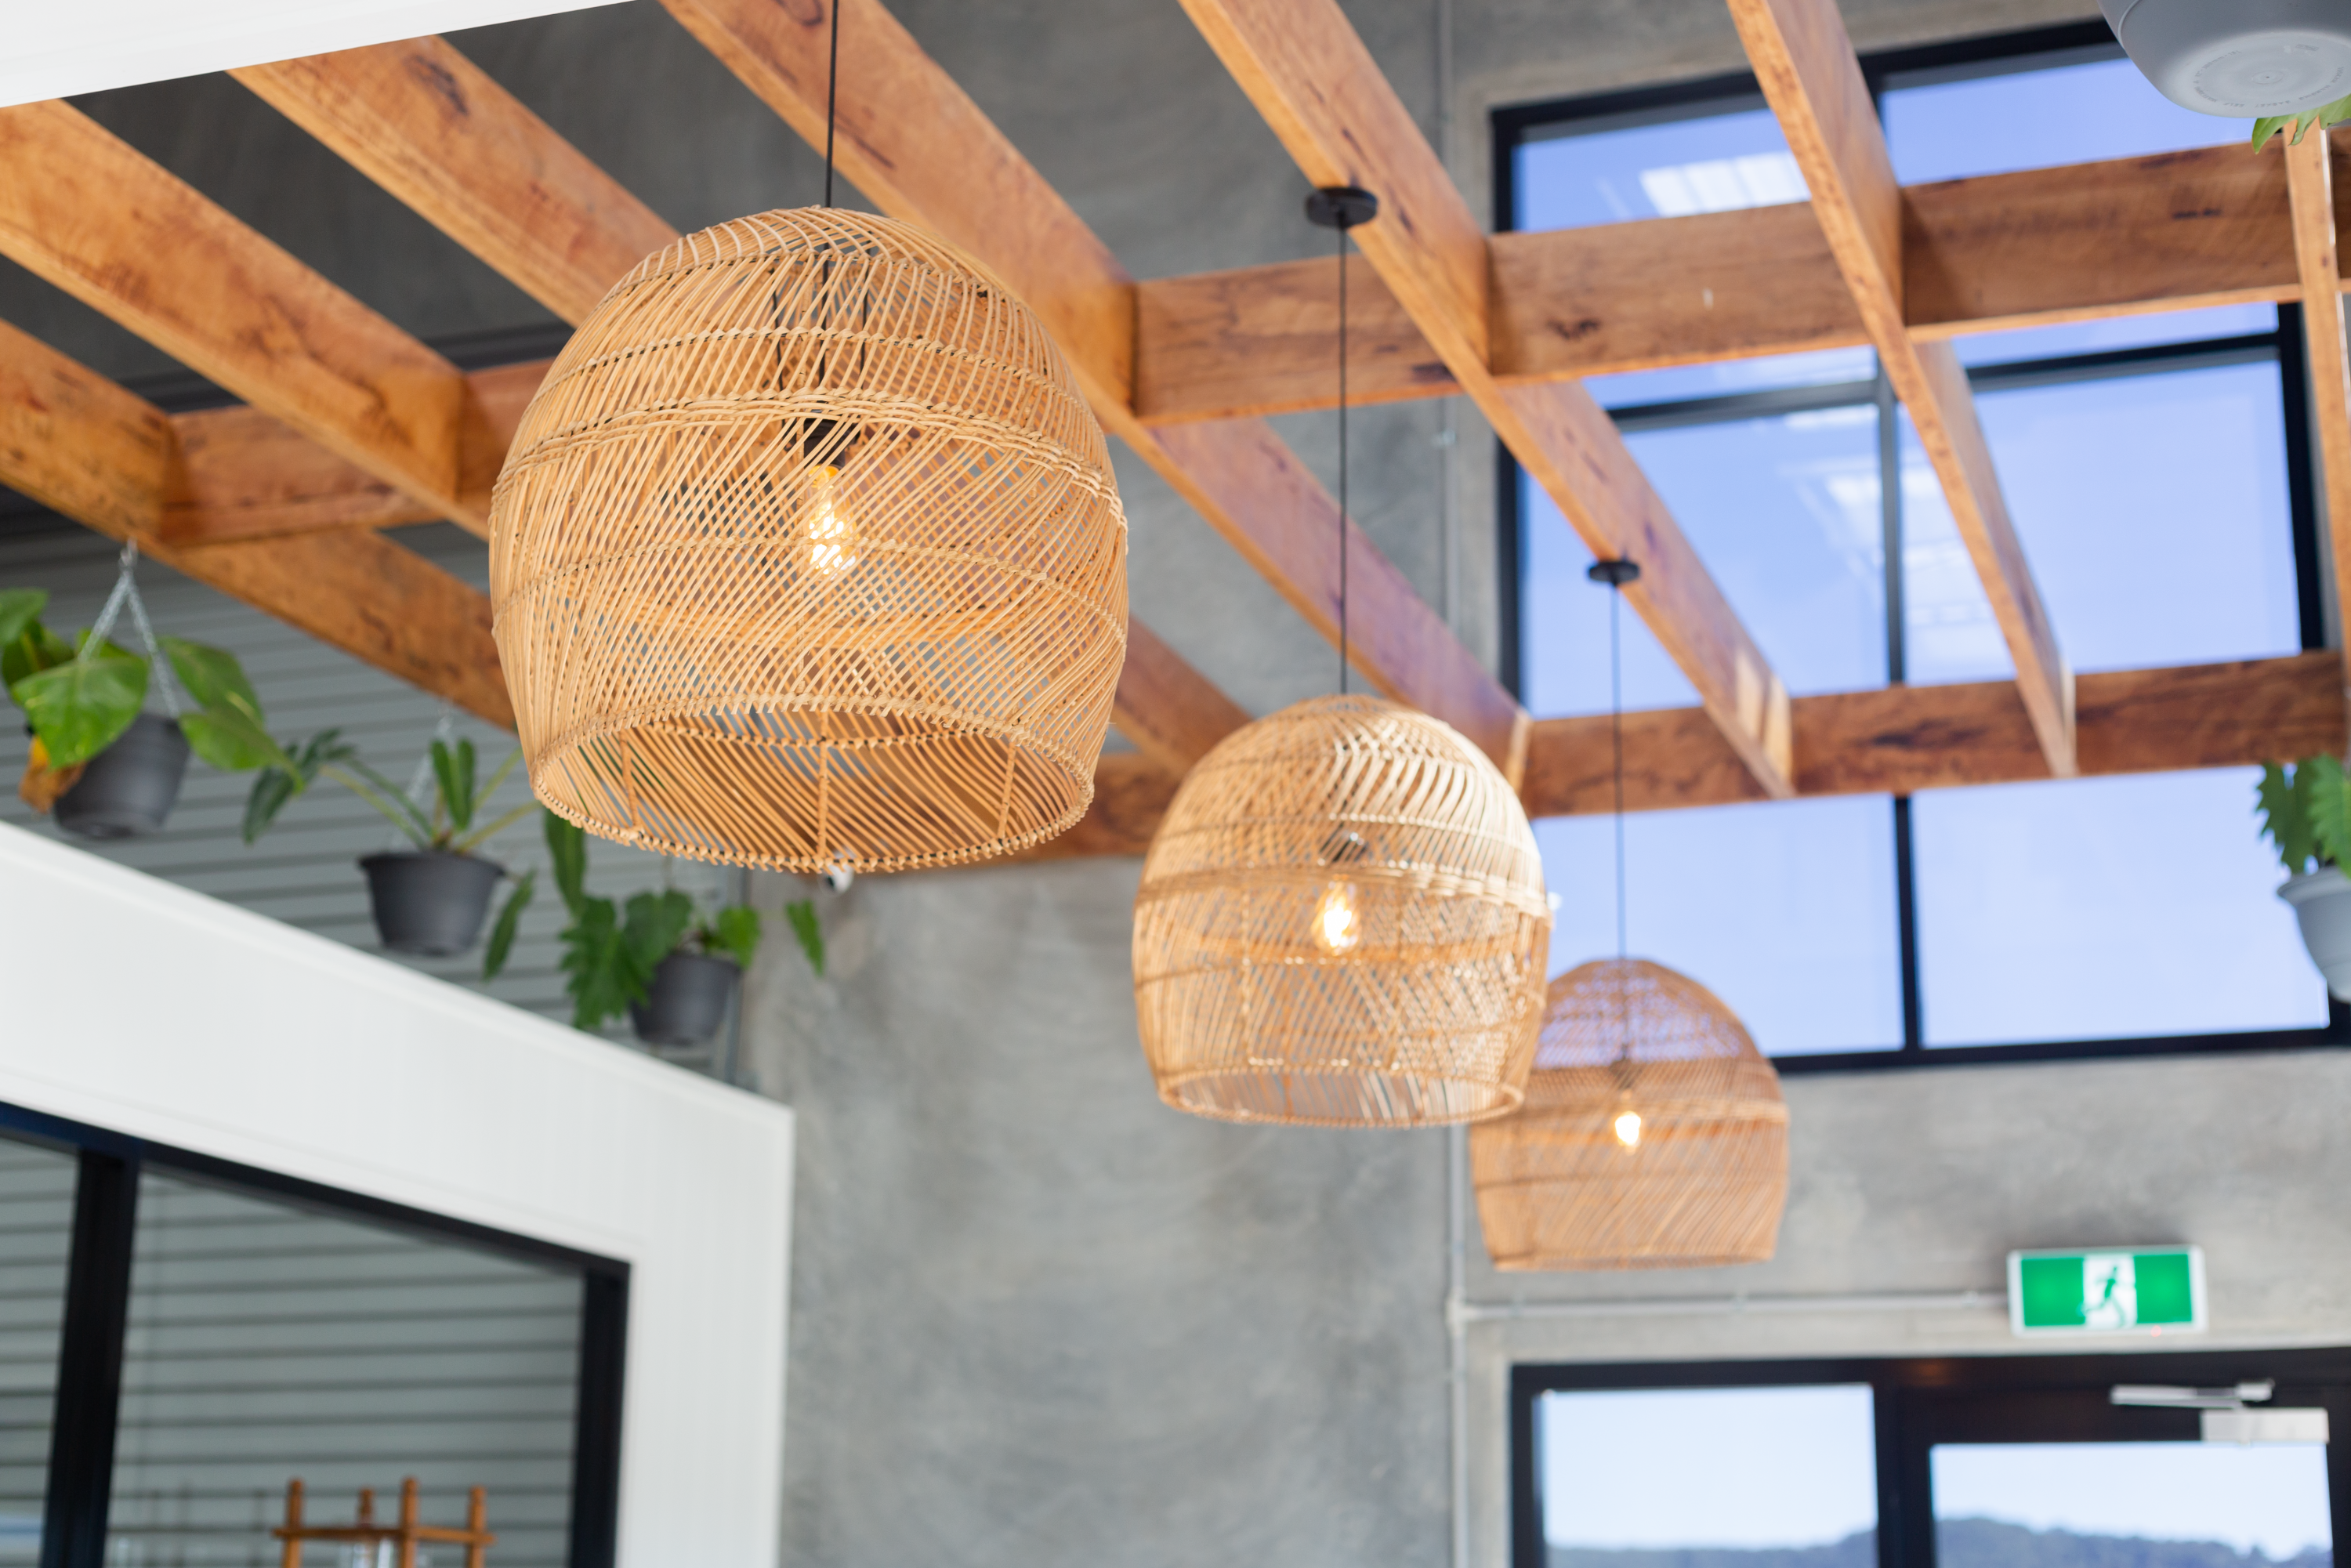 Wicker baskets around hanging bulbs against a varnished wood panelled ceiling.